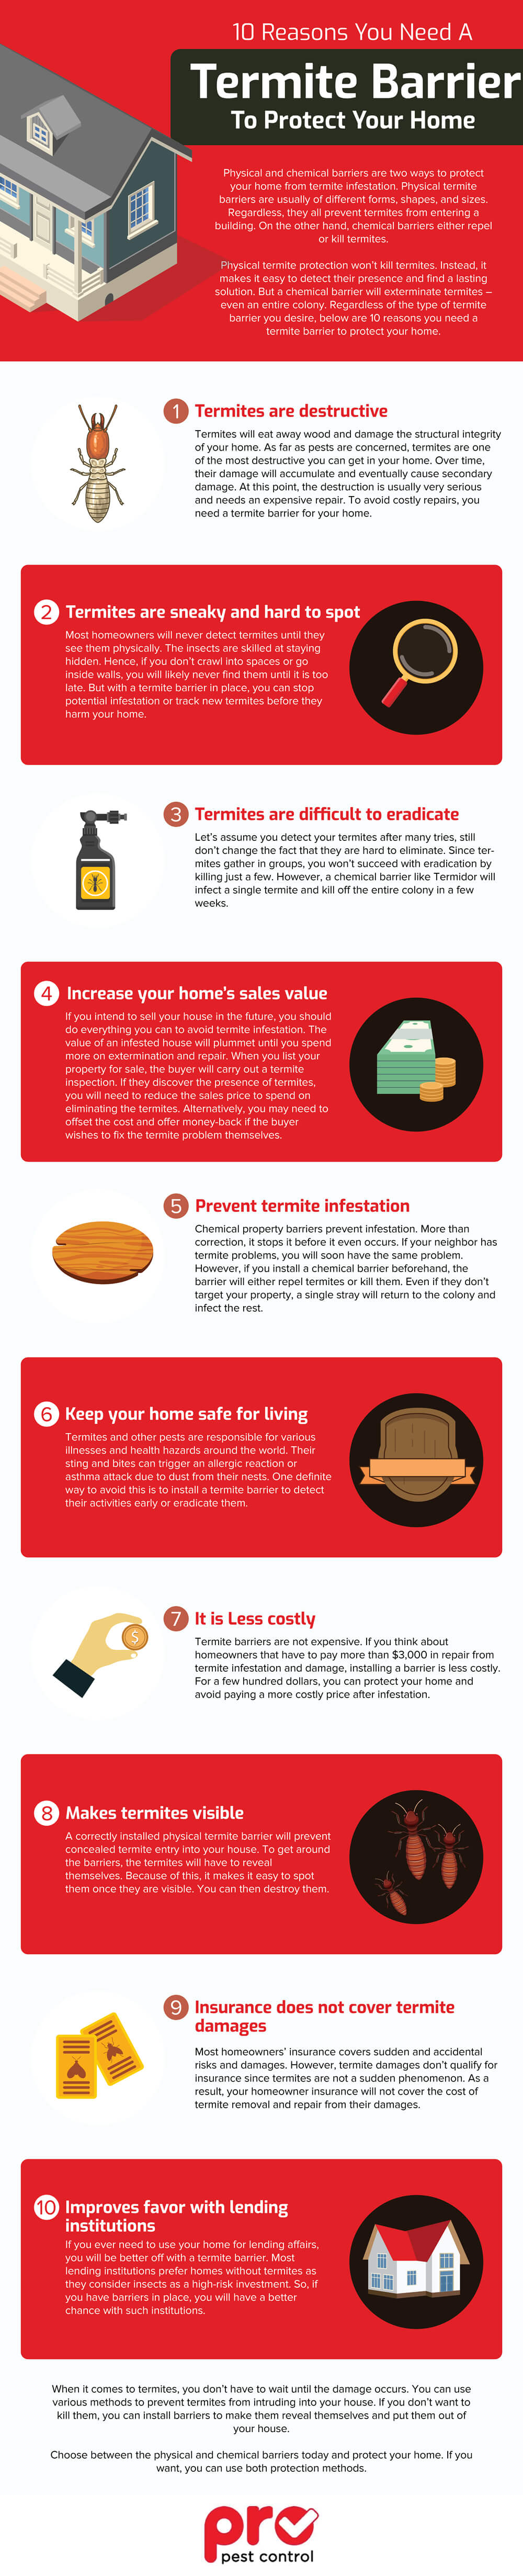 10 Reasons You Need A Termite Barrier To Protect Your Home